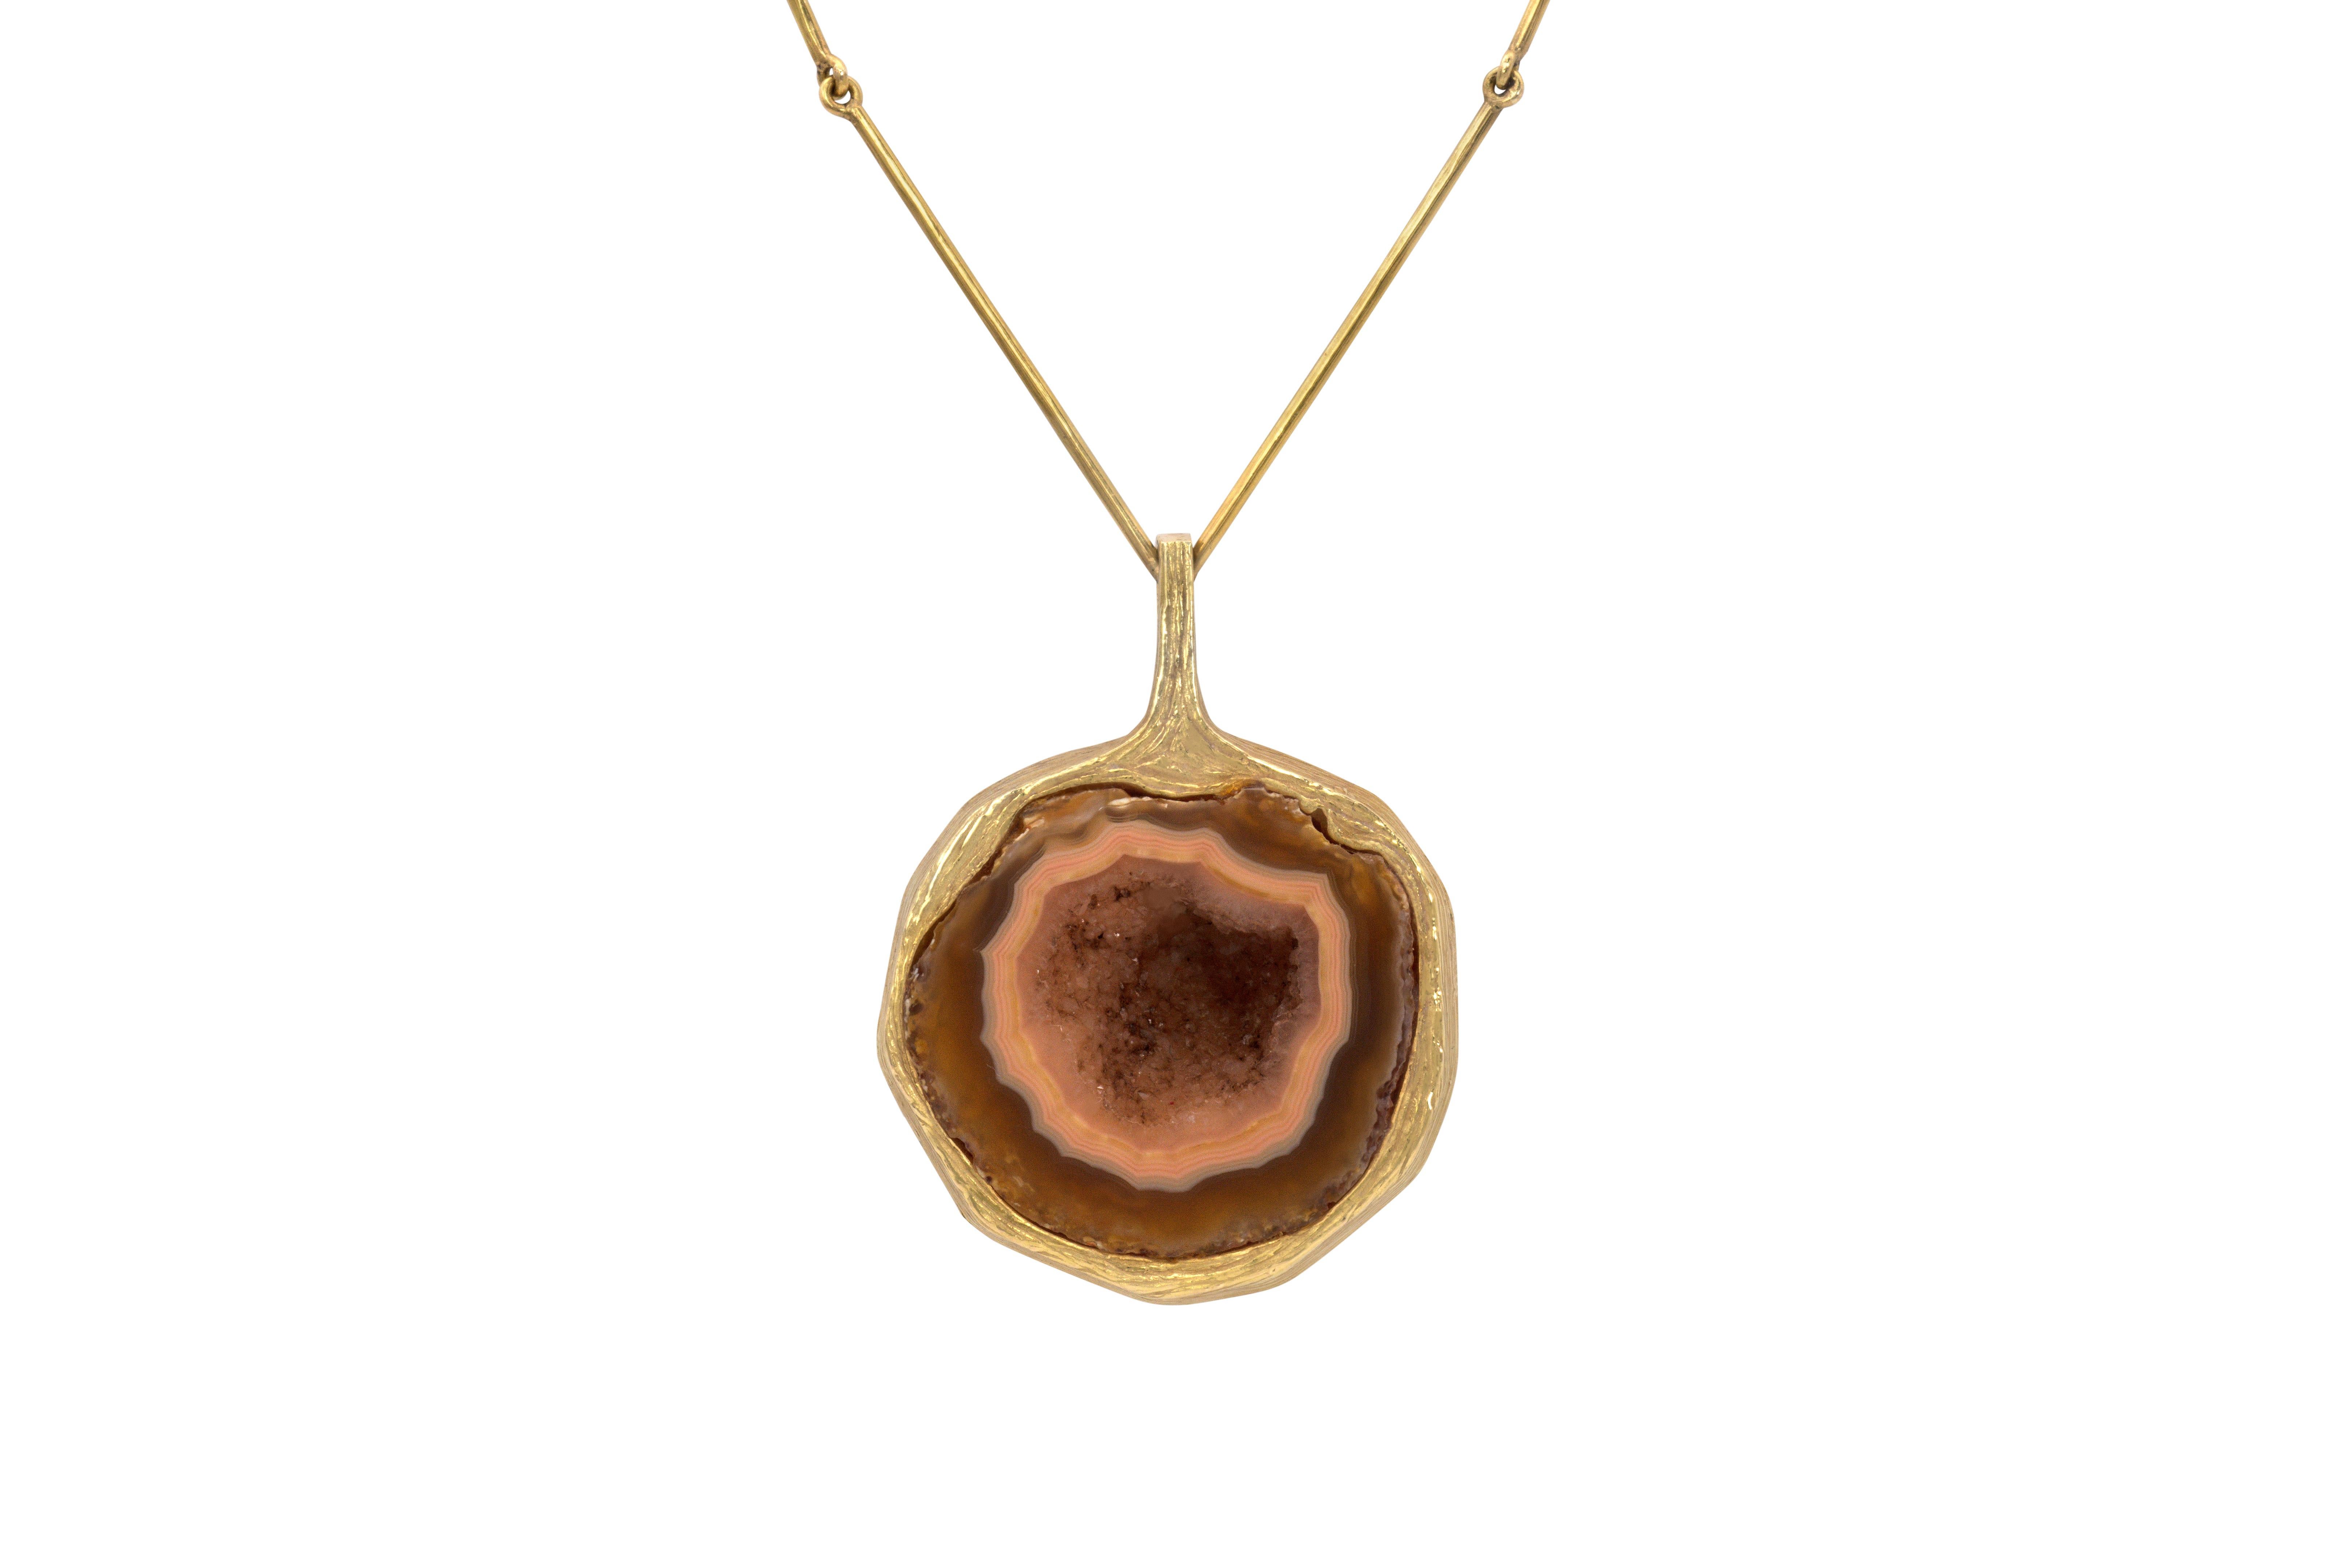 A handmade carved agate and 18-karat gold pendant necklace by Bent Gabrielsen, Denmark circa 1975. Back of pendant stamped: makers mark, B. Gabrielsen P., Denmark, U 193, 750. Toggle stamped: BGP 750 DENMARK.

Gabrielsen most often worked in silver;